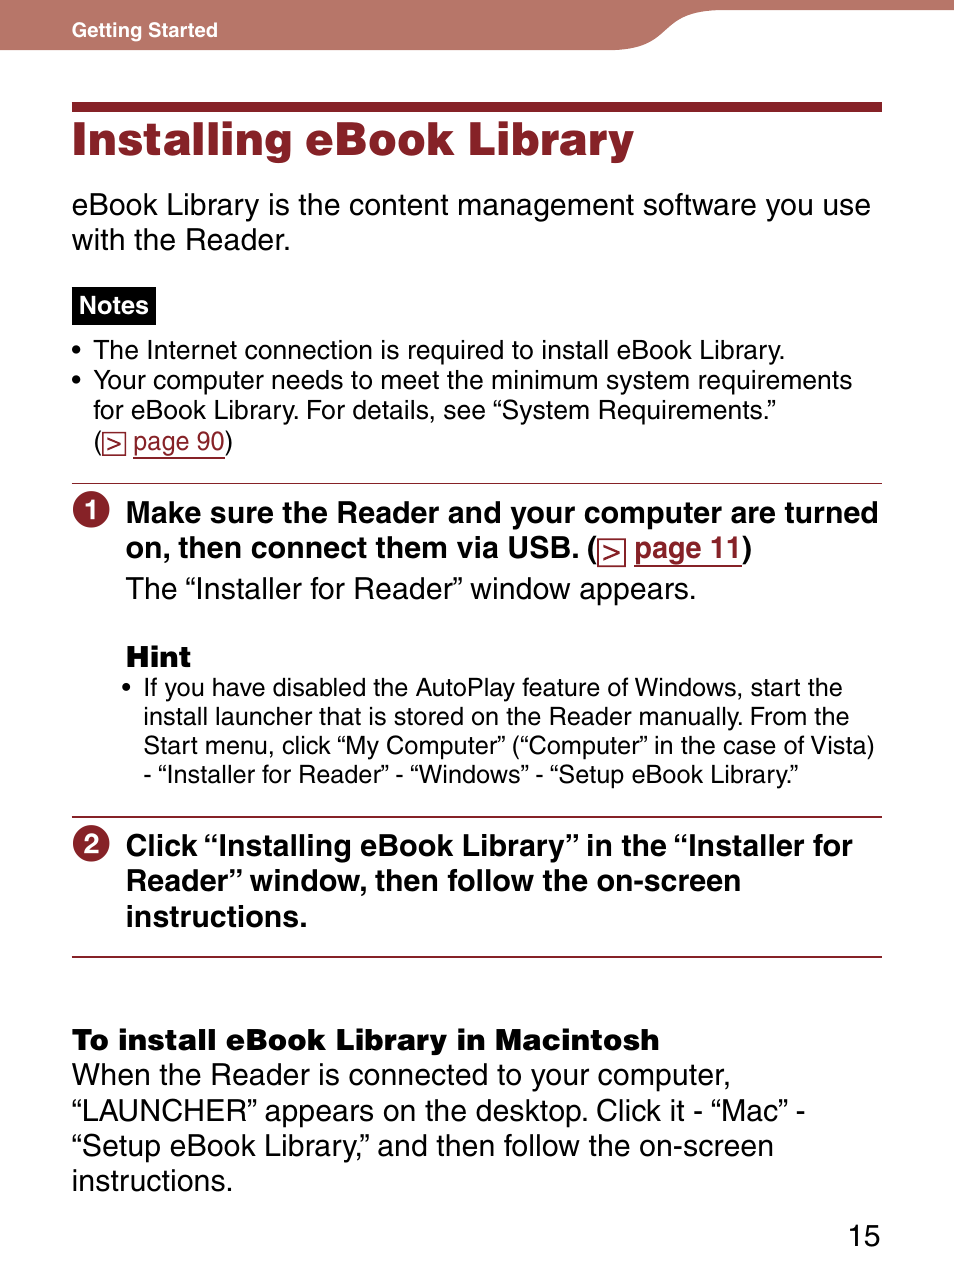 Installing ebook library | Sony PRS-300LC User Manual | Page 15 / 92